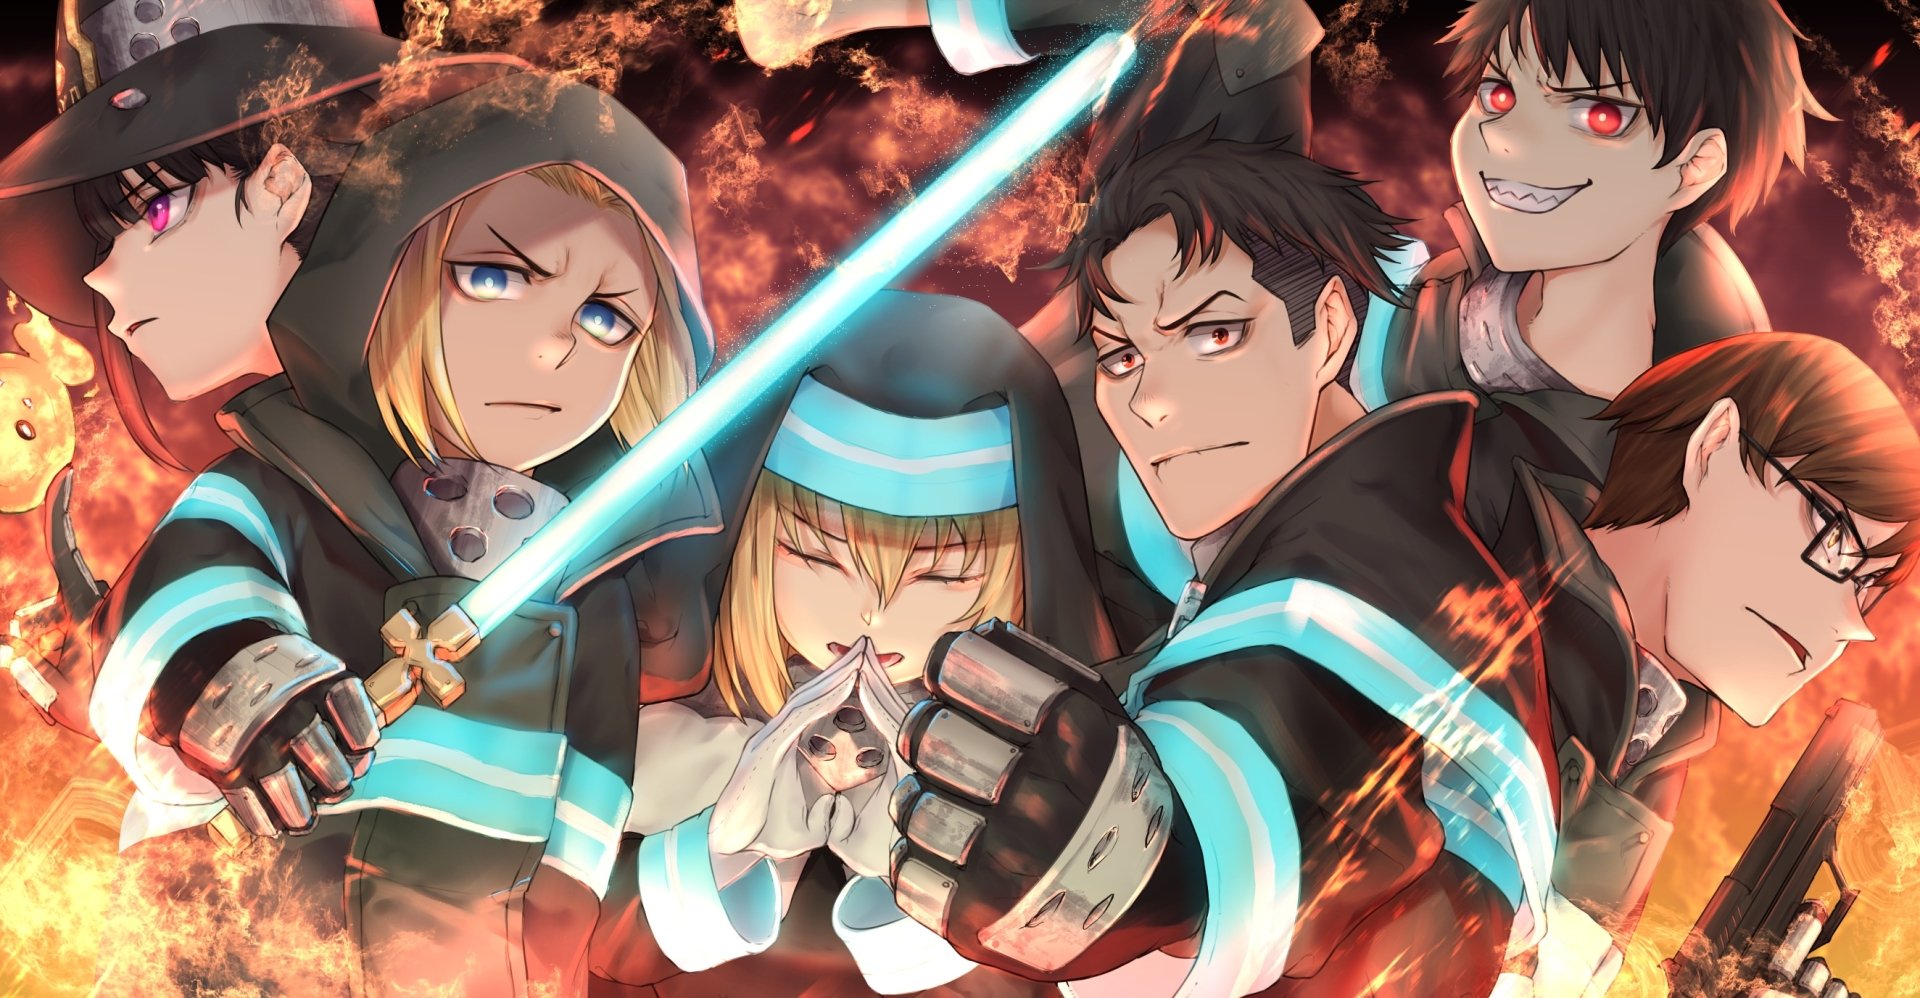 Anime Fire Force HD Wallpaper by はちべえ